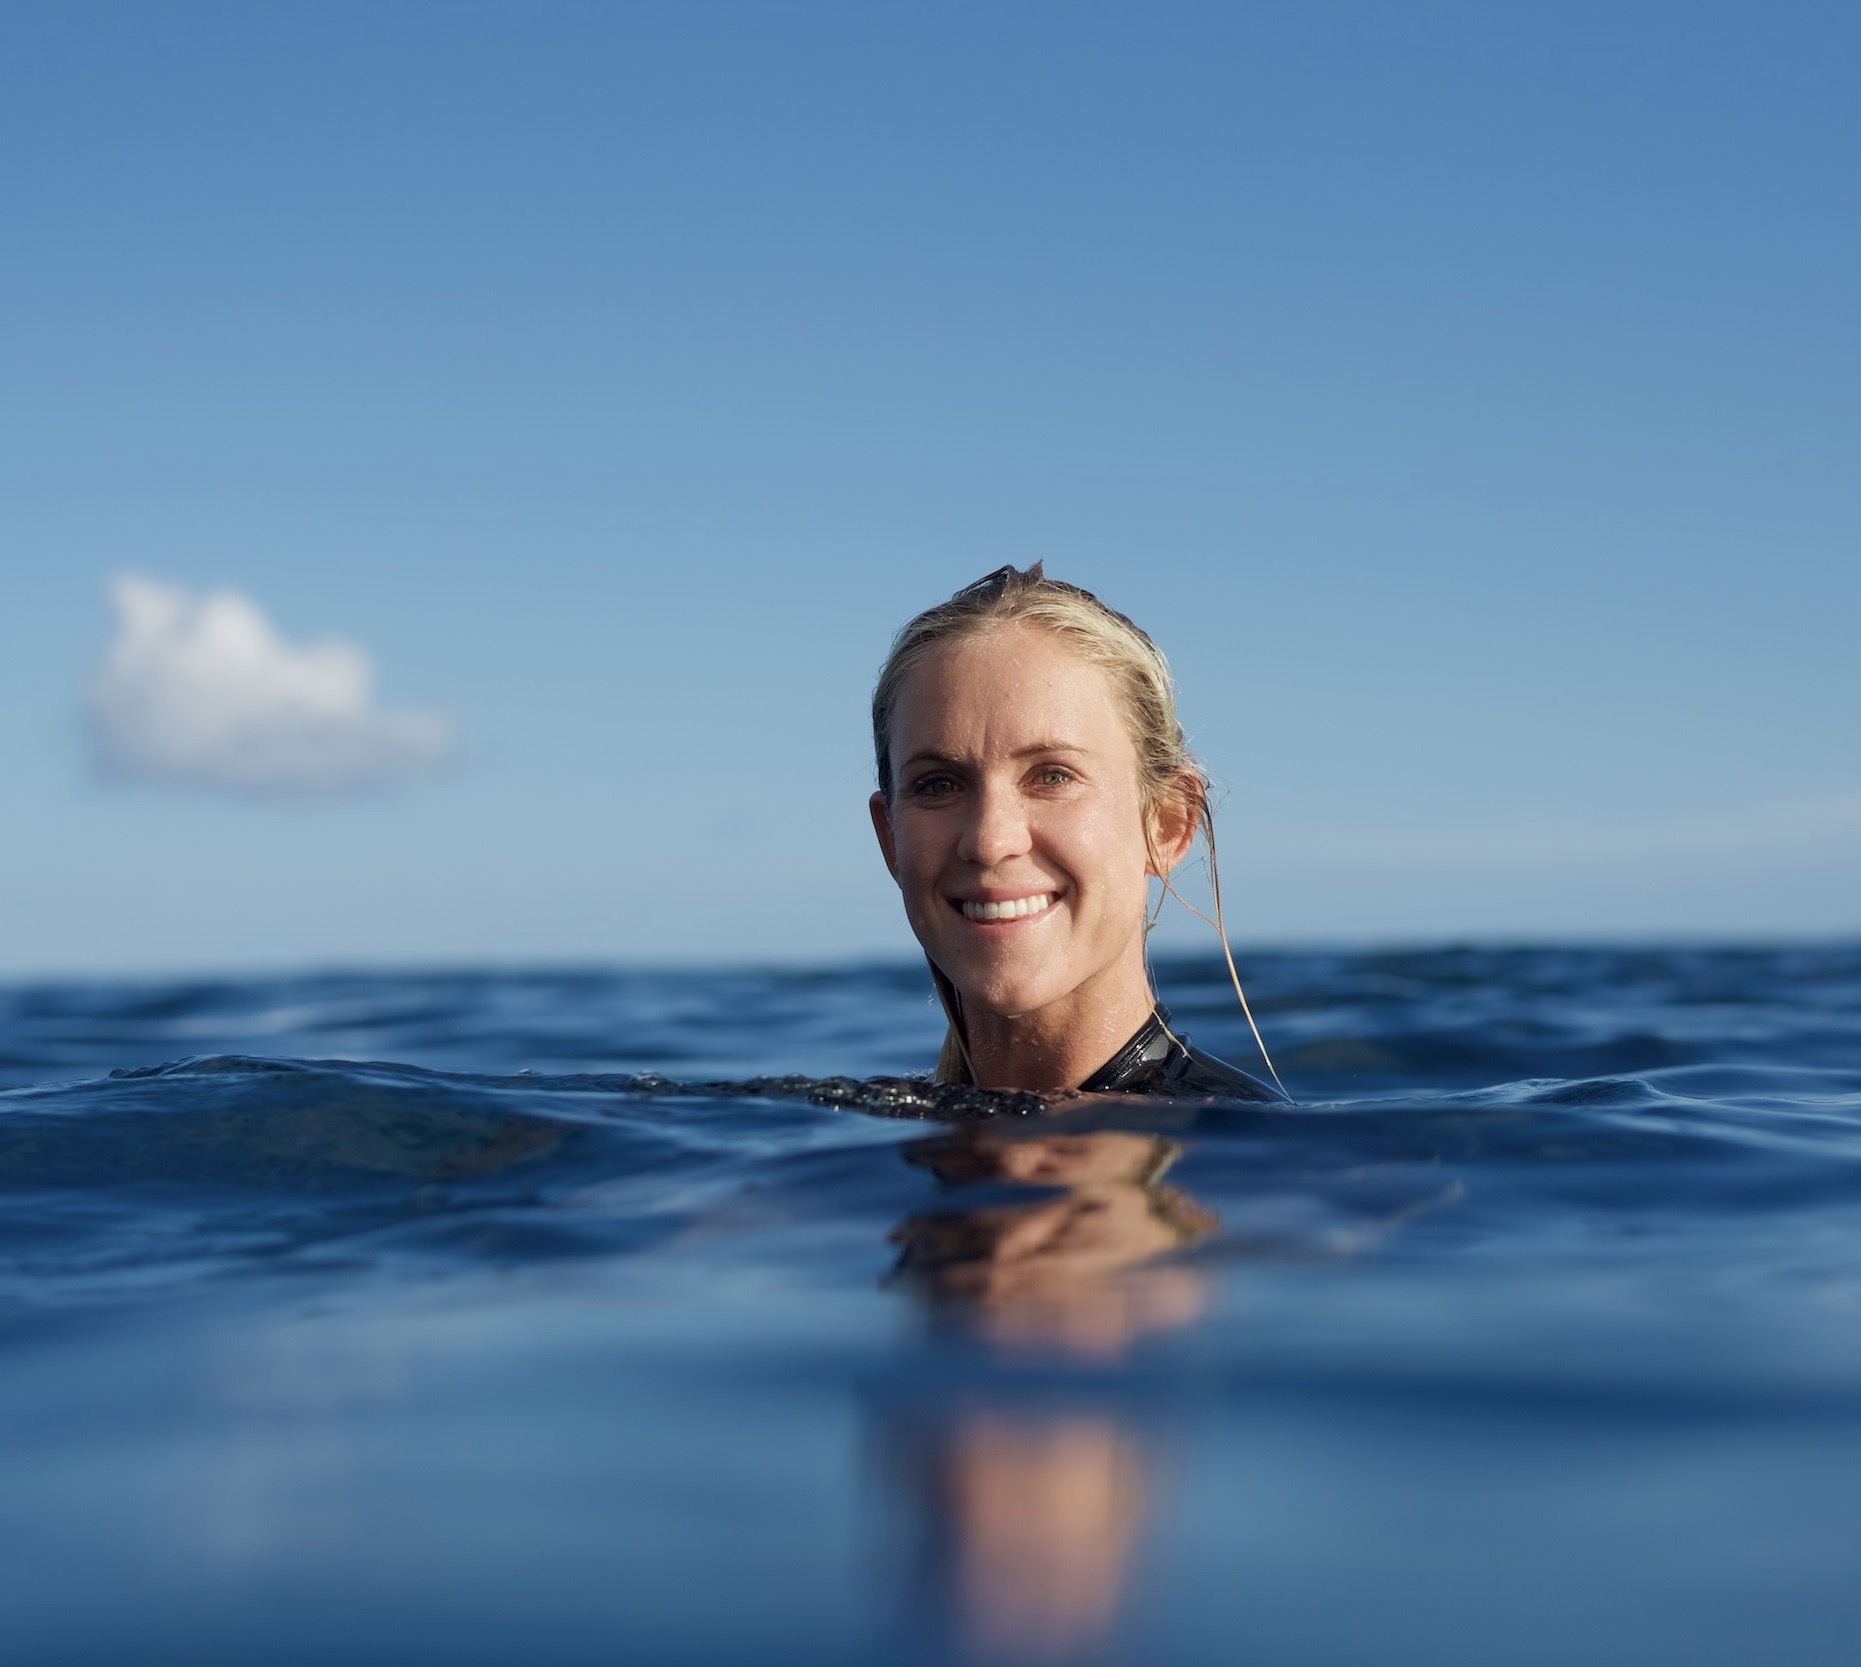 Bethany swims in the ocean to train for surfing